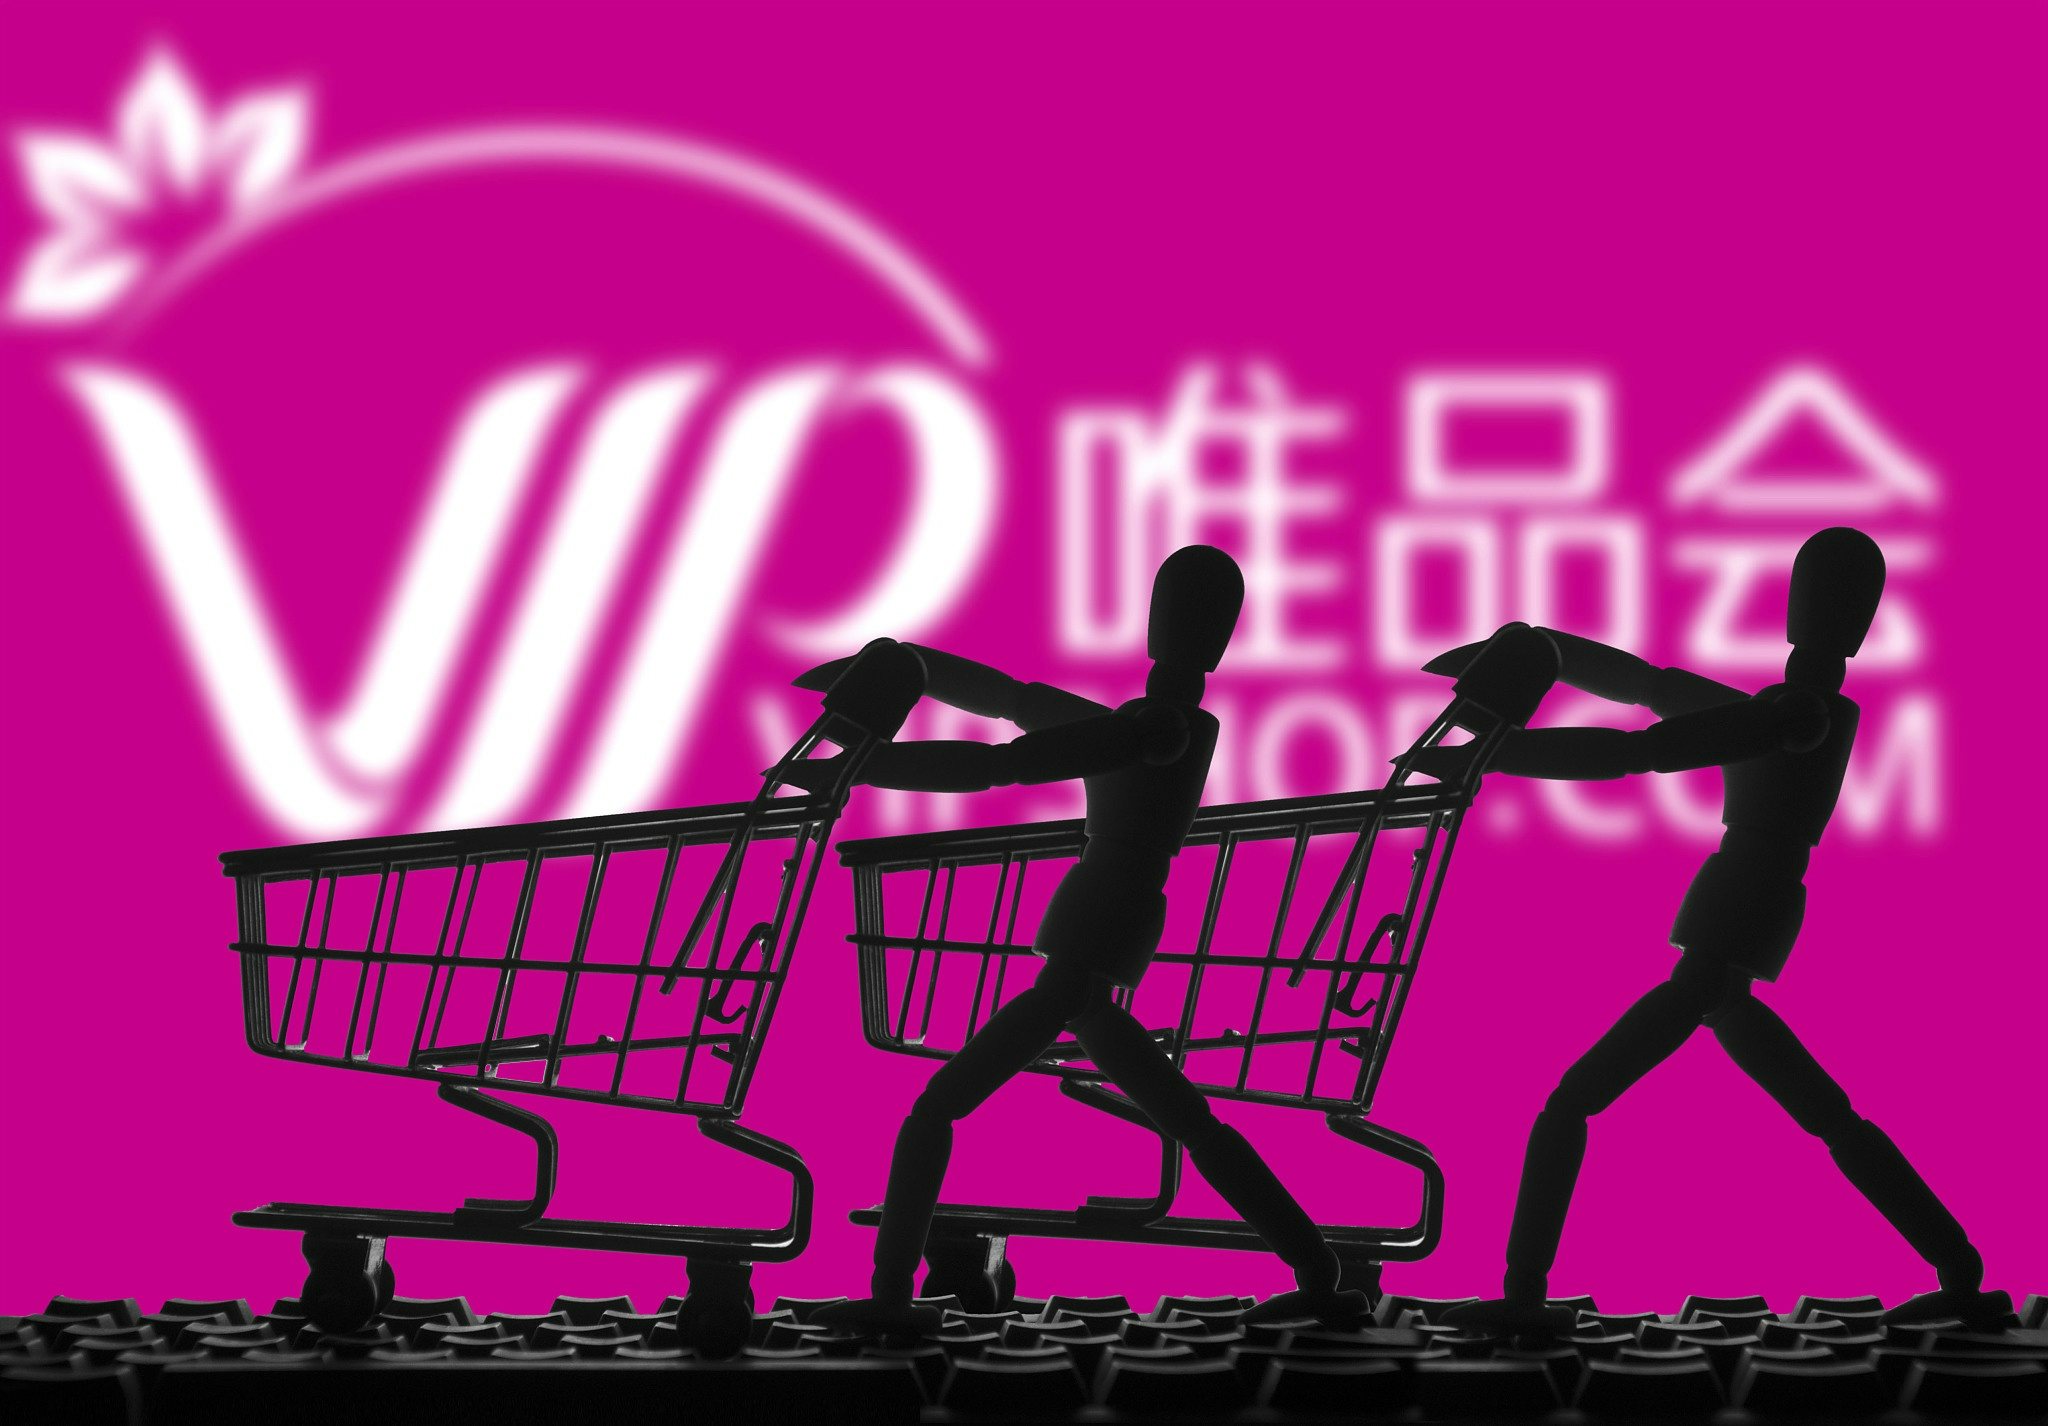 Online retailer Vipshop reported lower-than-expected Q4 2018 revenue on Thursday despite significant growth in active users. Photo: VCG